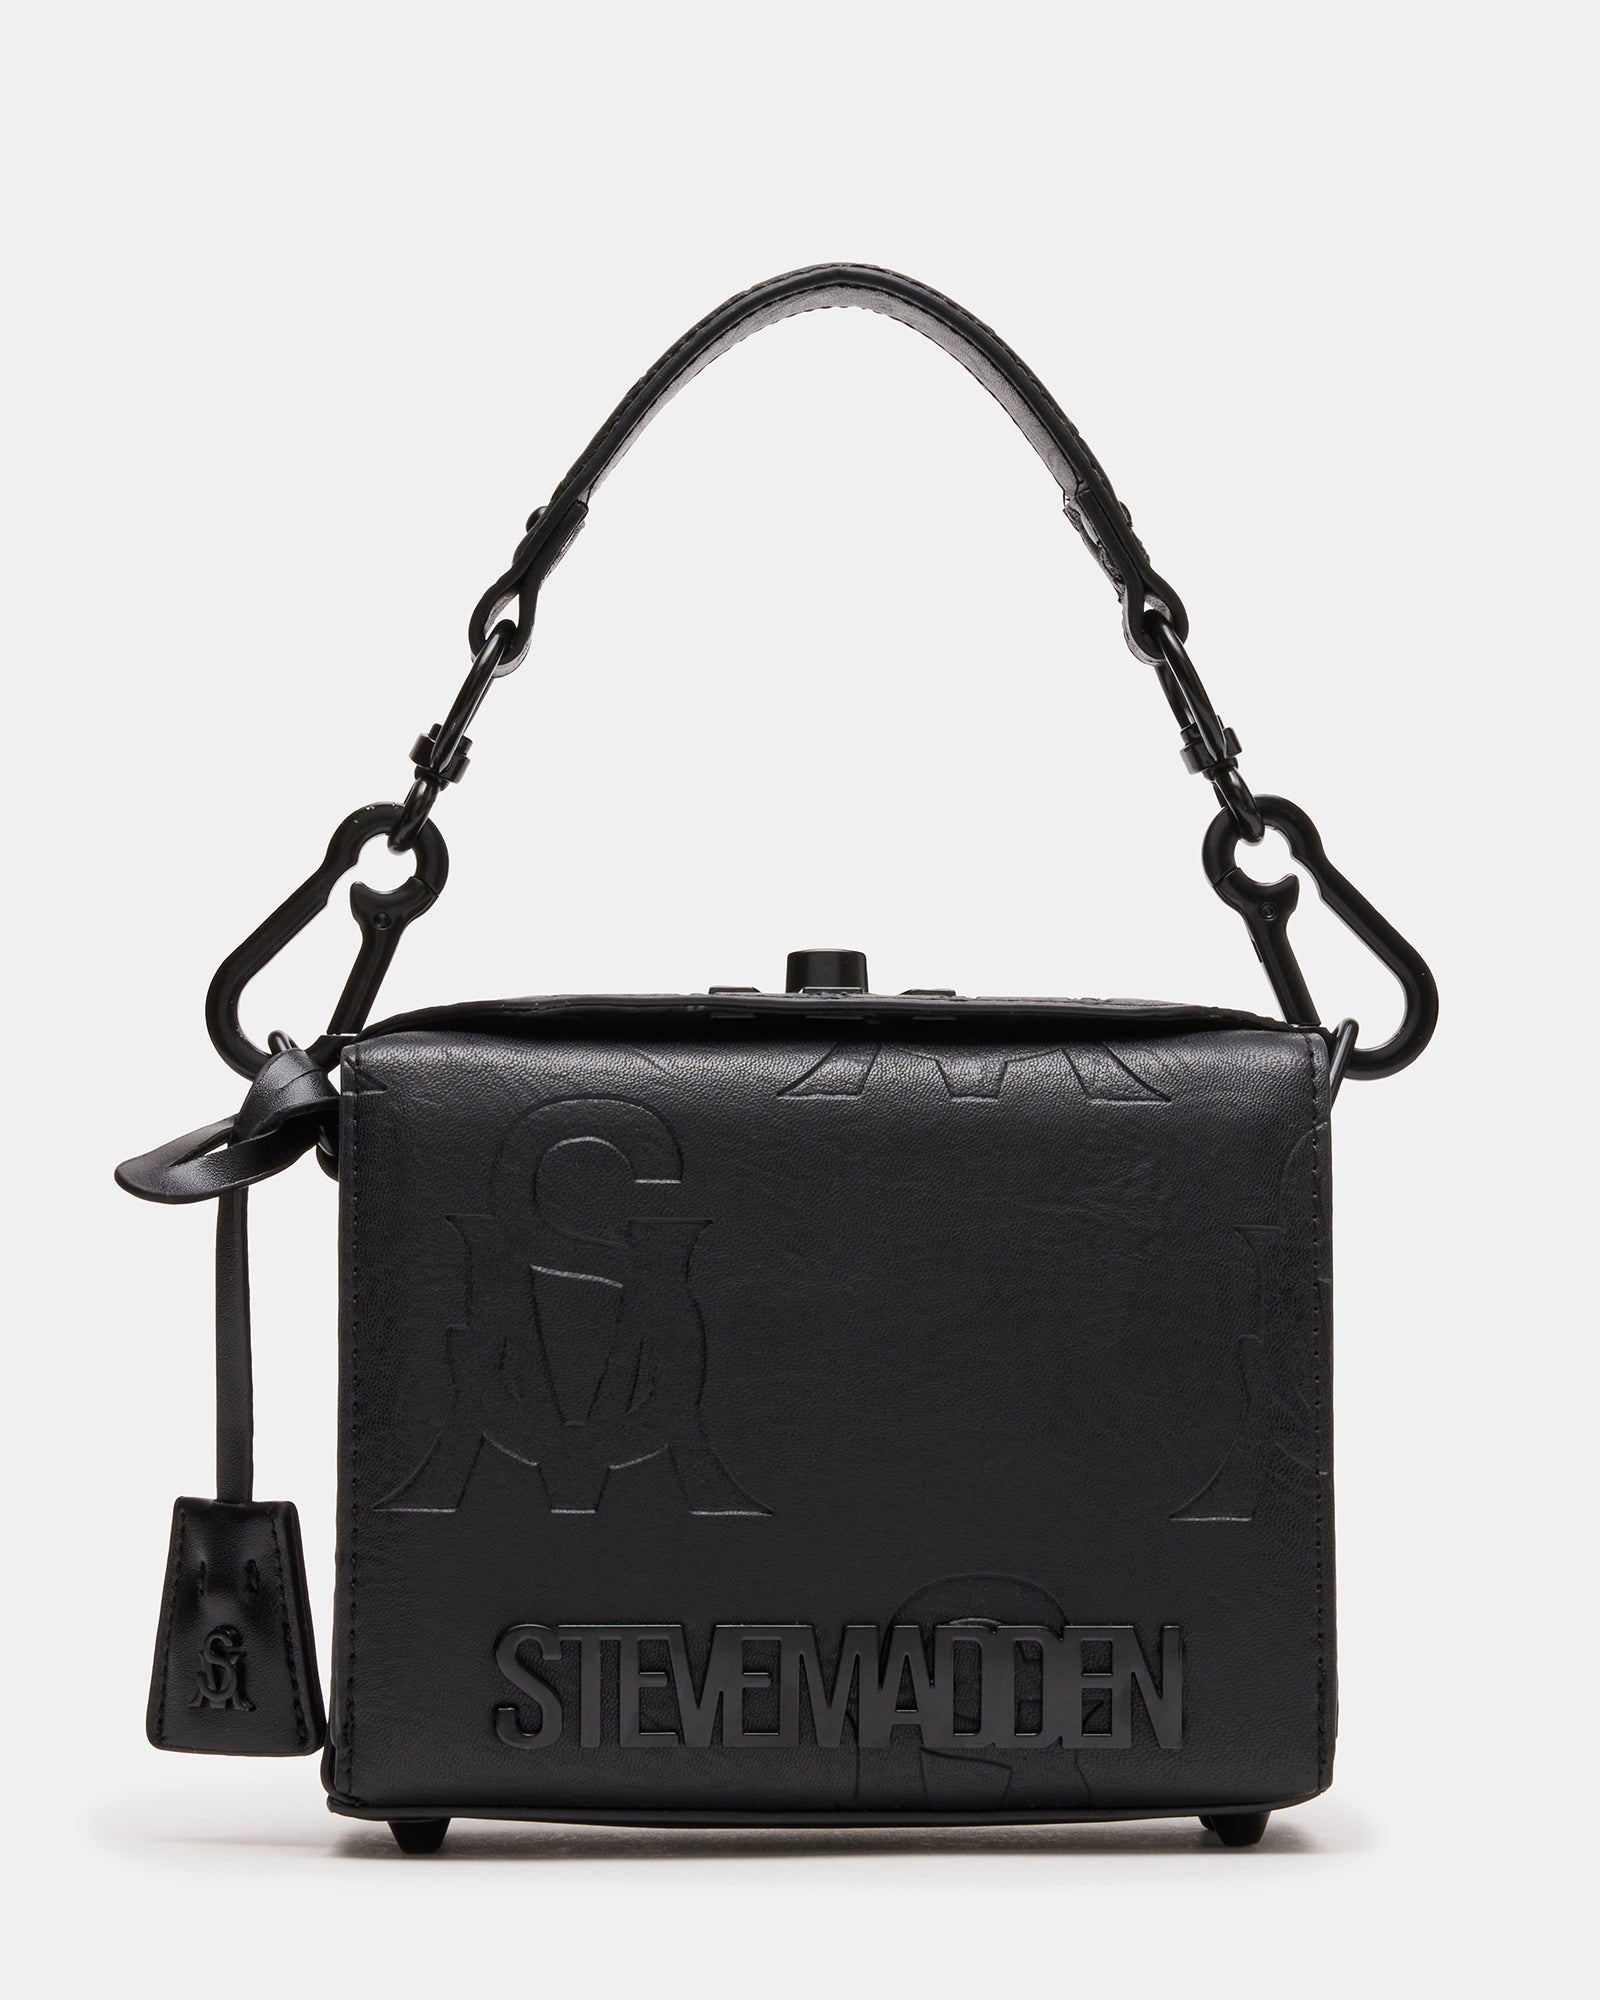 Large Steve Madden bag. Crossbody. Perfect for everyday wear.